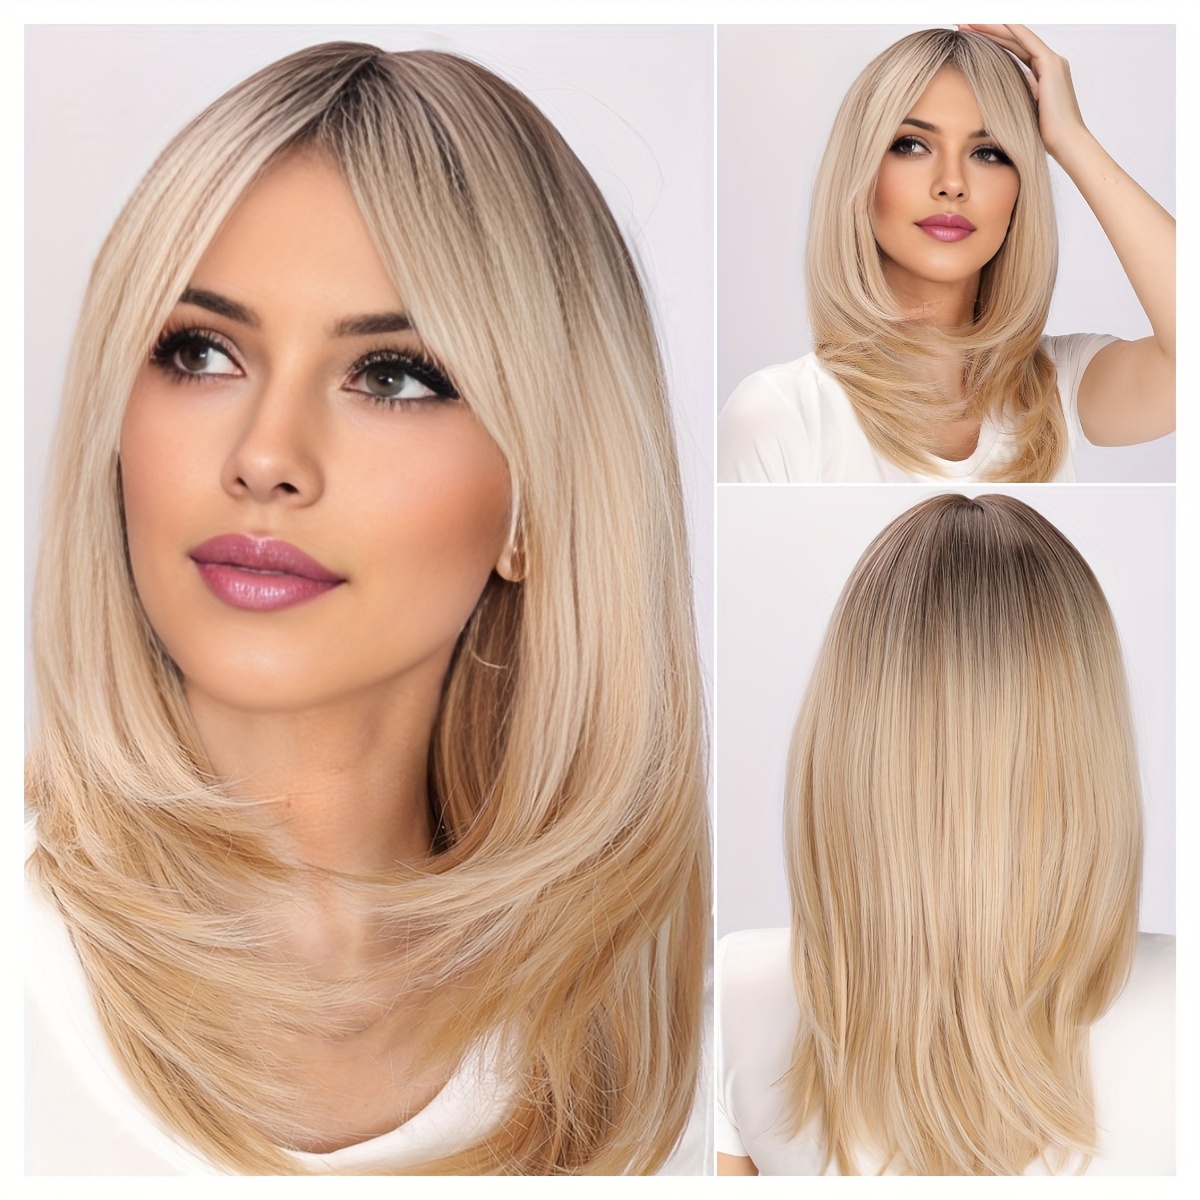 

Natural Straight Blonde Ombre Medium-length Hair Synthetic Fiber Wig, Elegant And Artsy Style, For Parties And Daily Wearing, Breathable, Comfortable And Easy To Care For, 20 Inches